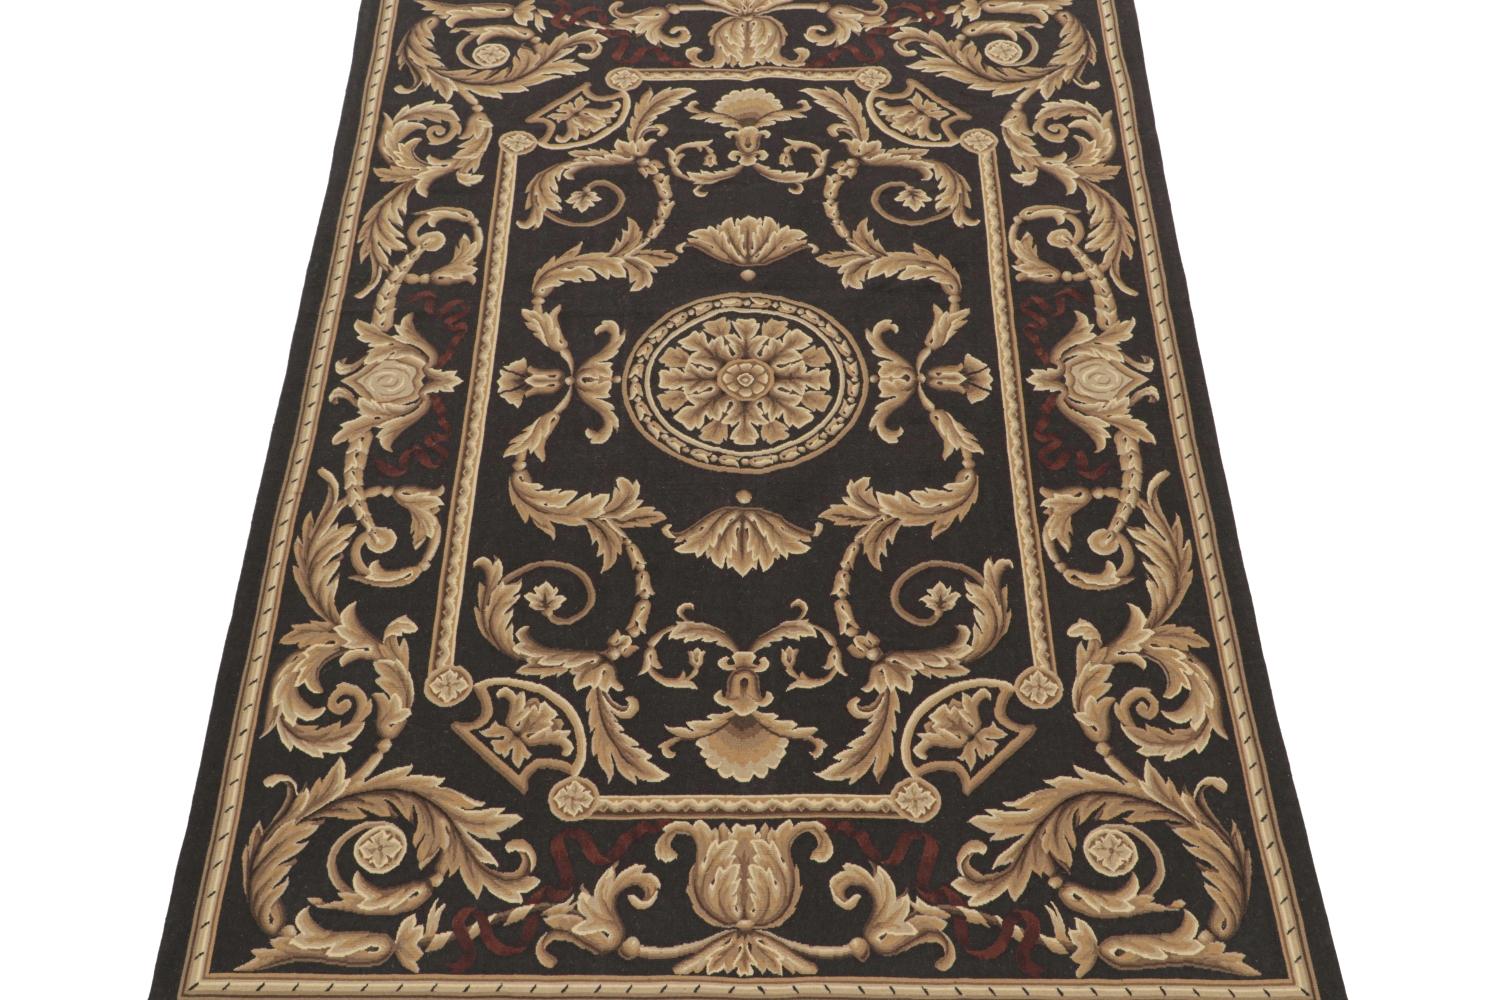 Rug & Kilim’s Aubusson Style Flatweave in Brown with Medallion & Floral Patterns In Good Condition For Sale In Long Island City, NY